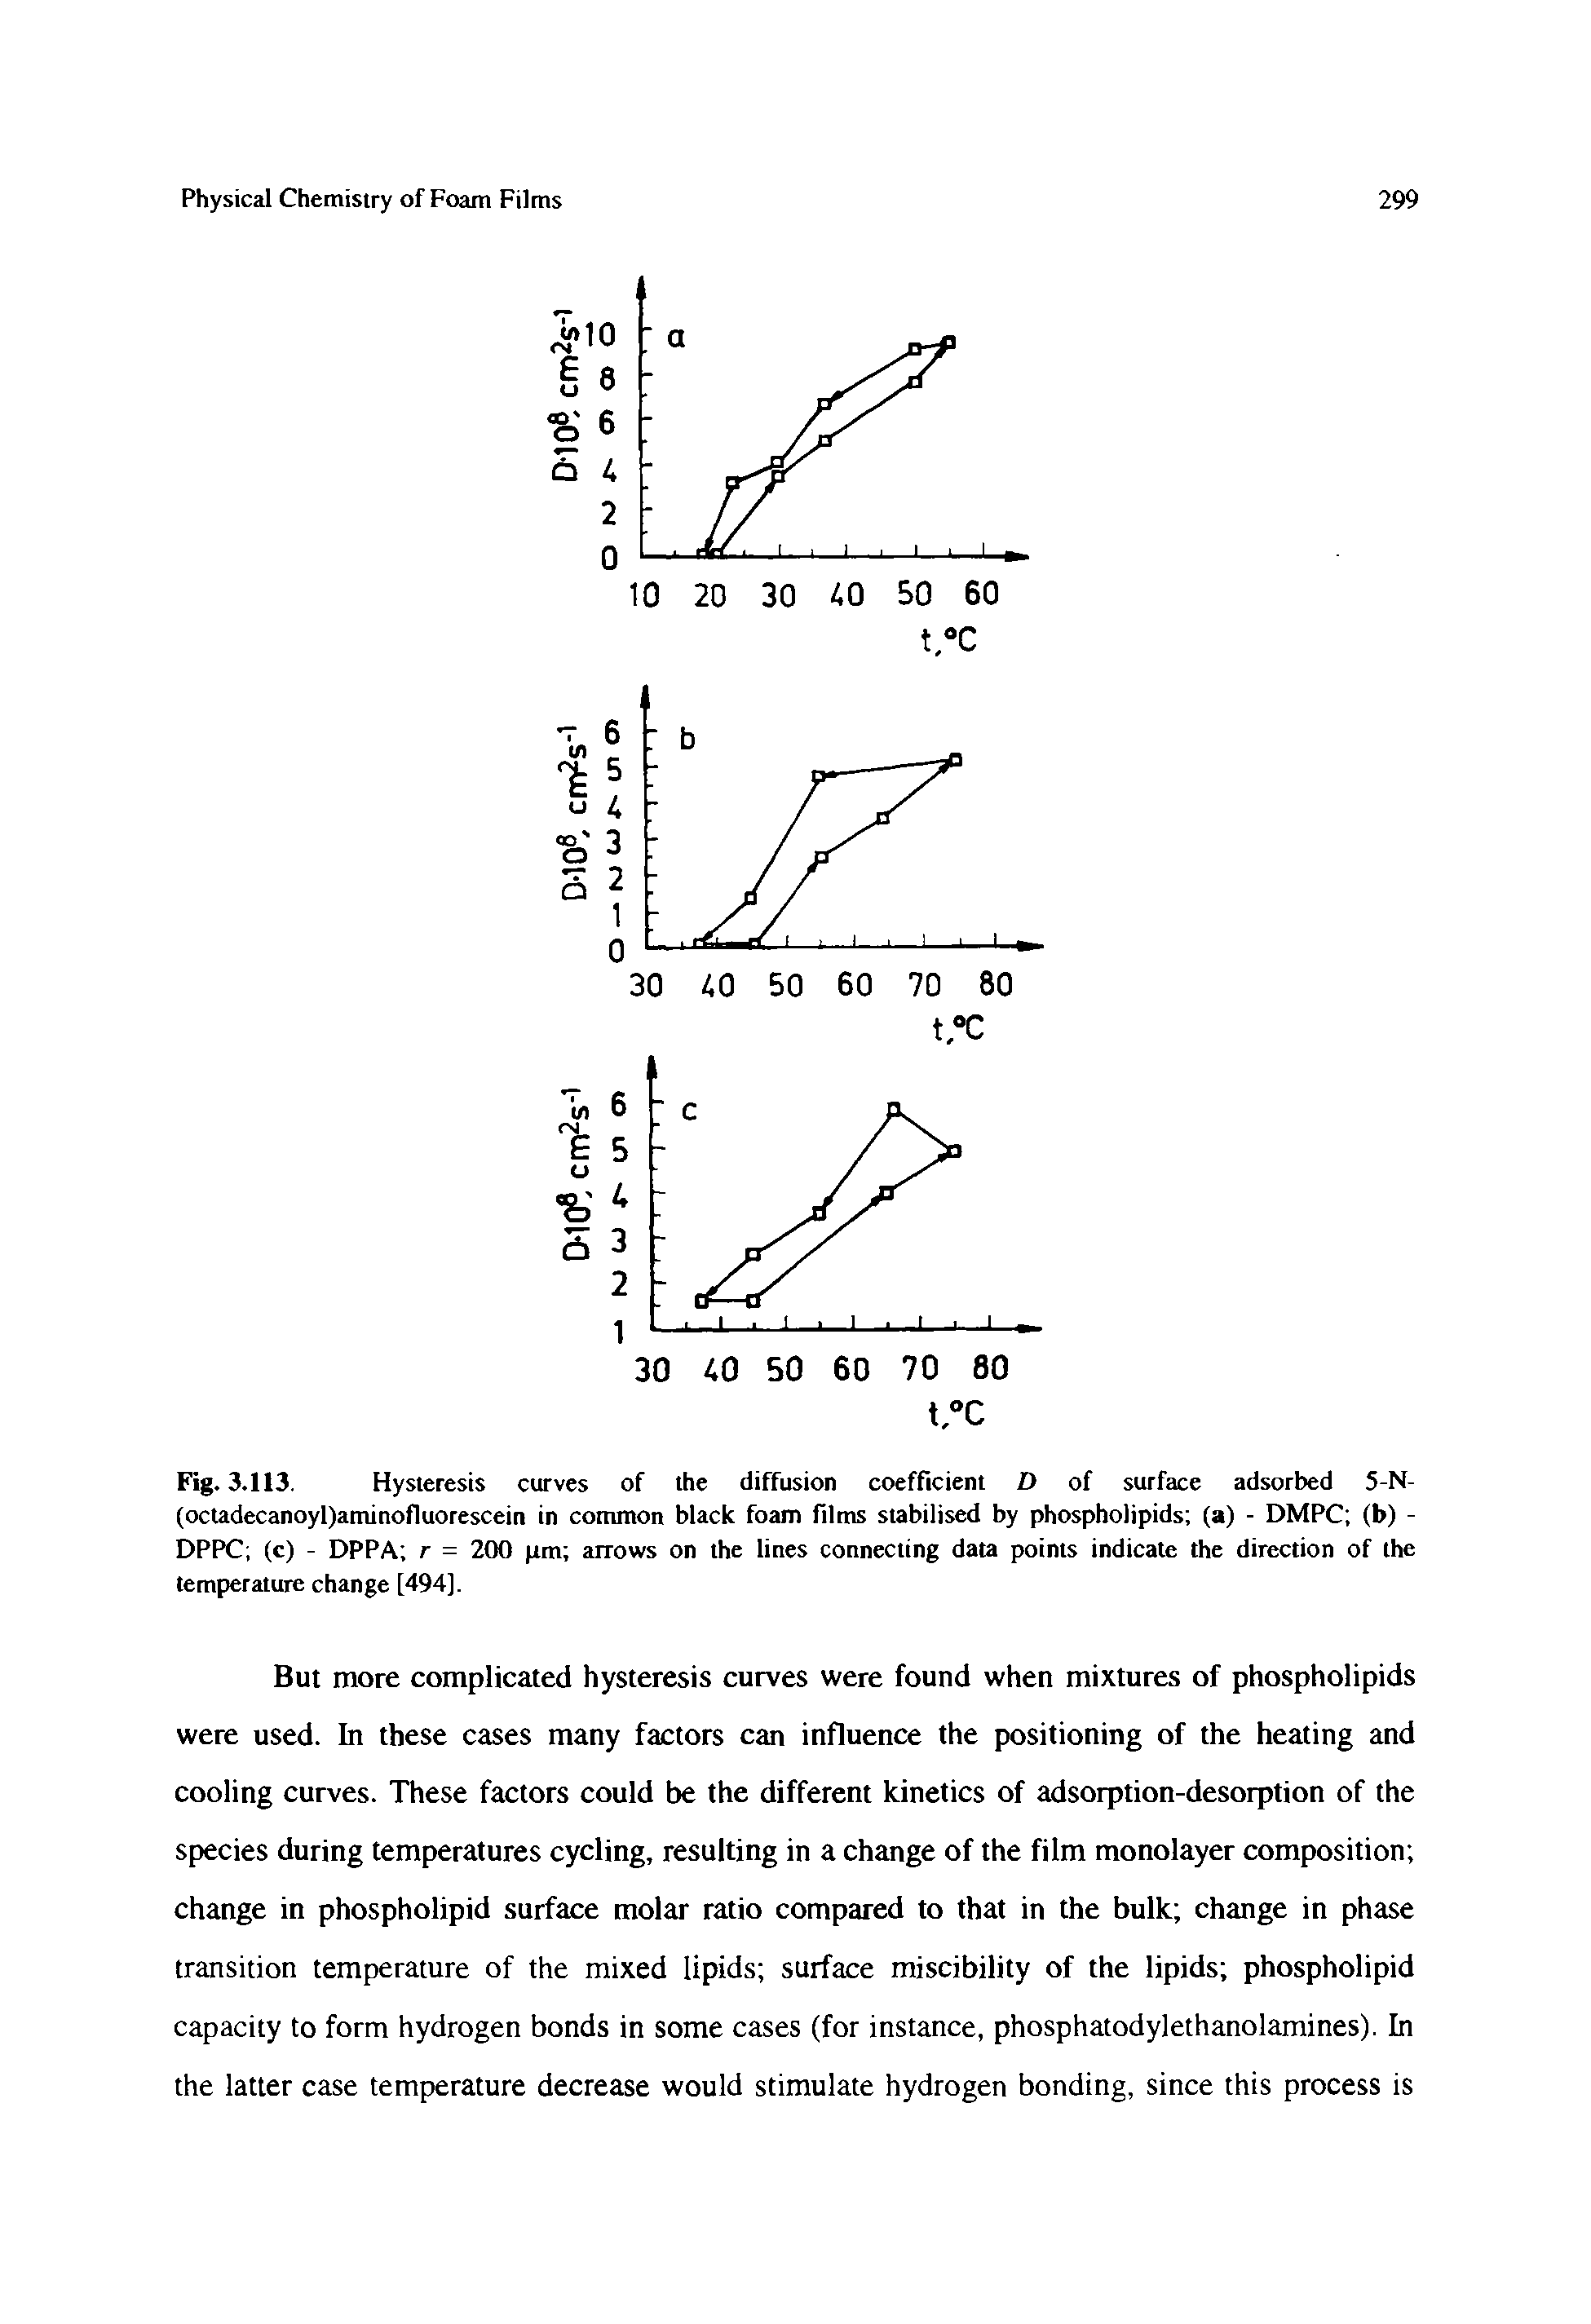 Fig. 3.113. Hysteresis curves of the diffusion coefficient D of surface adsorbed 5-N-(octadecanoyl)aminofluorescein in common black foam films stabilised by phospholipids (a) - DMPC (b) -DPPC (c) - DPPA r = 200 pm arrows on the lines connecting data points indicate the direction of the temperature change [494],...